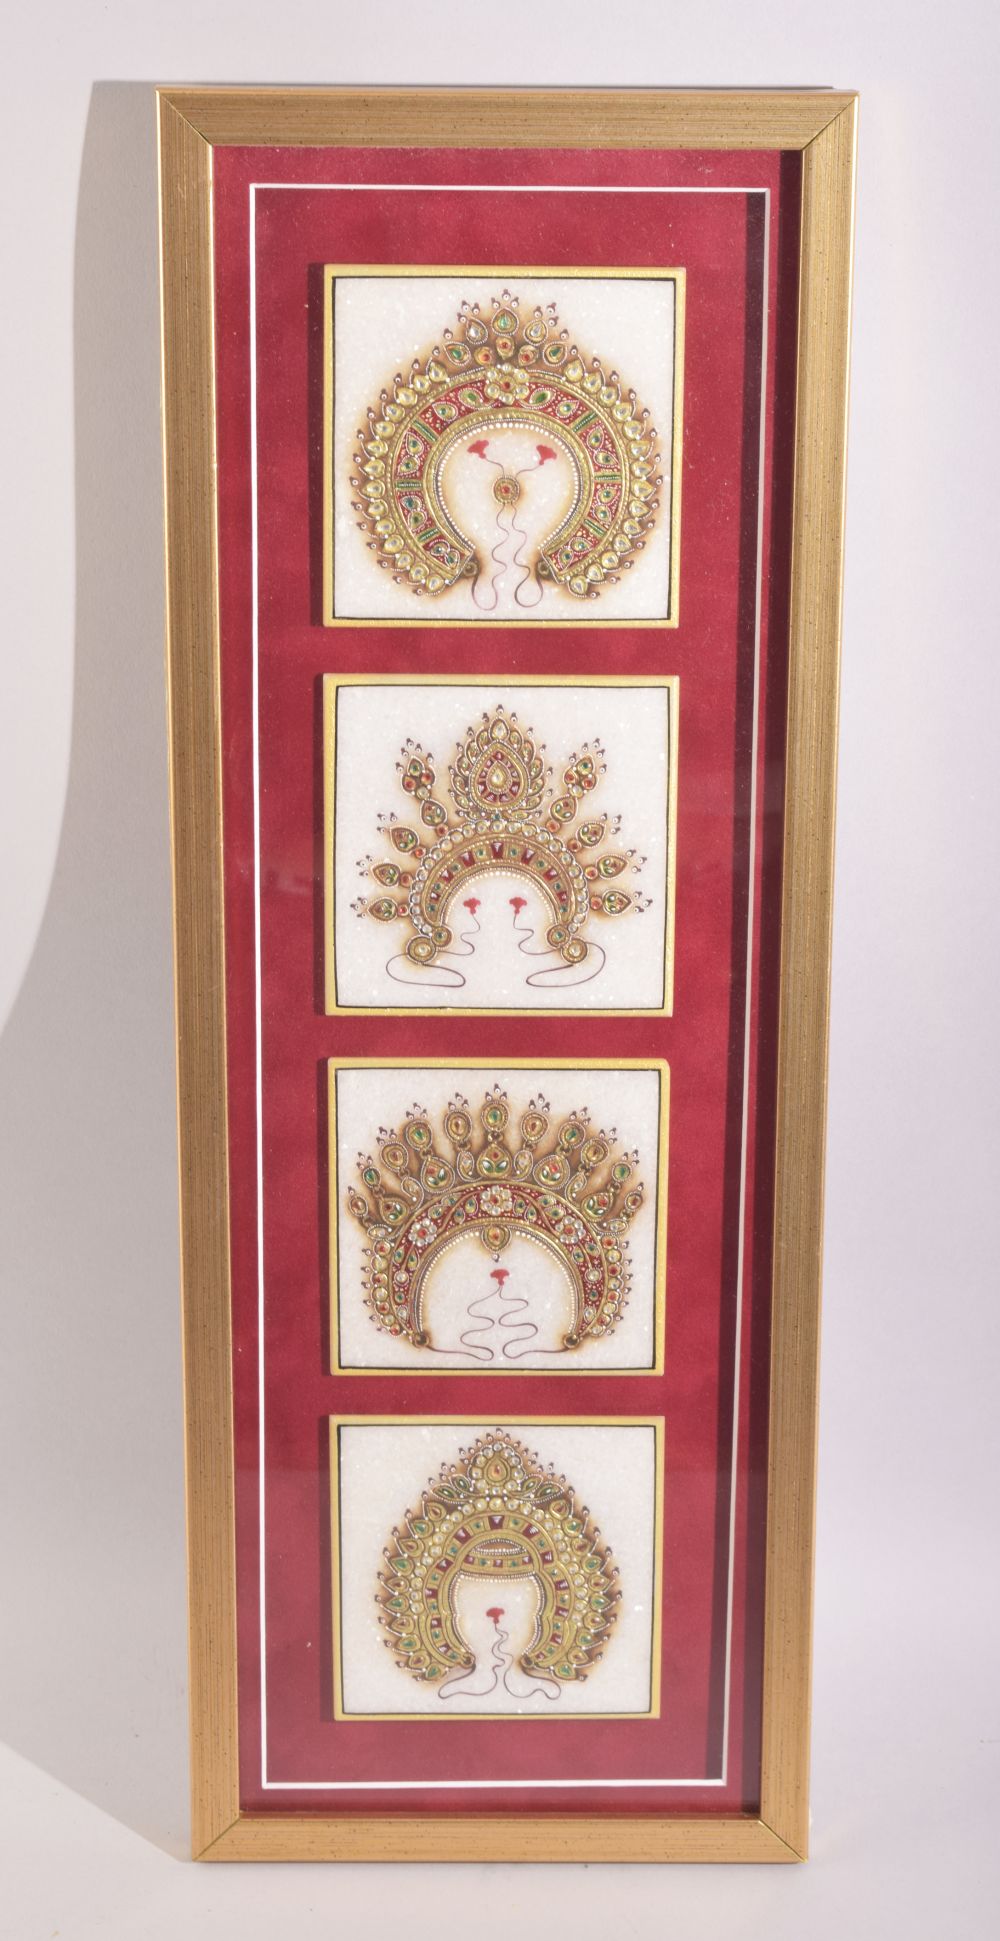 A SET OF FOUR TANJORE RAJASTHAN PAINTED MARBLE TILES, painted in gold and overlaid with semi-